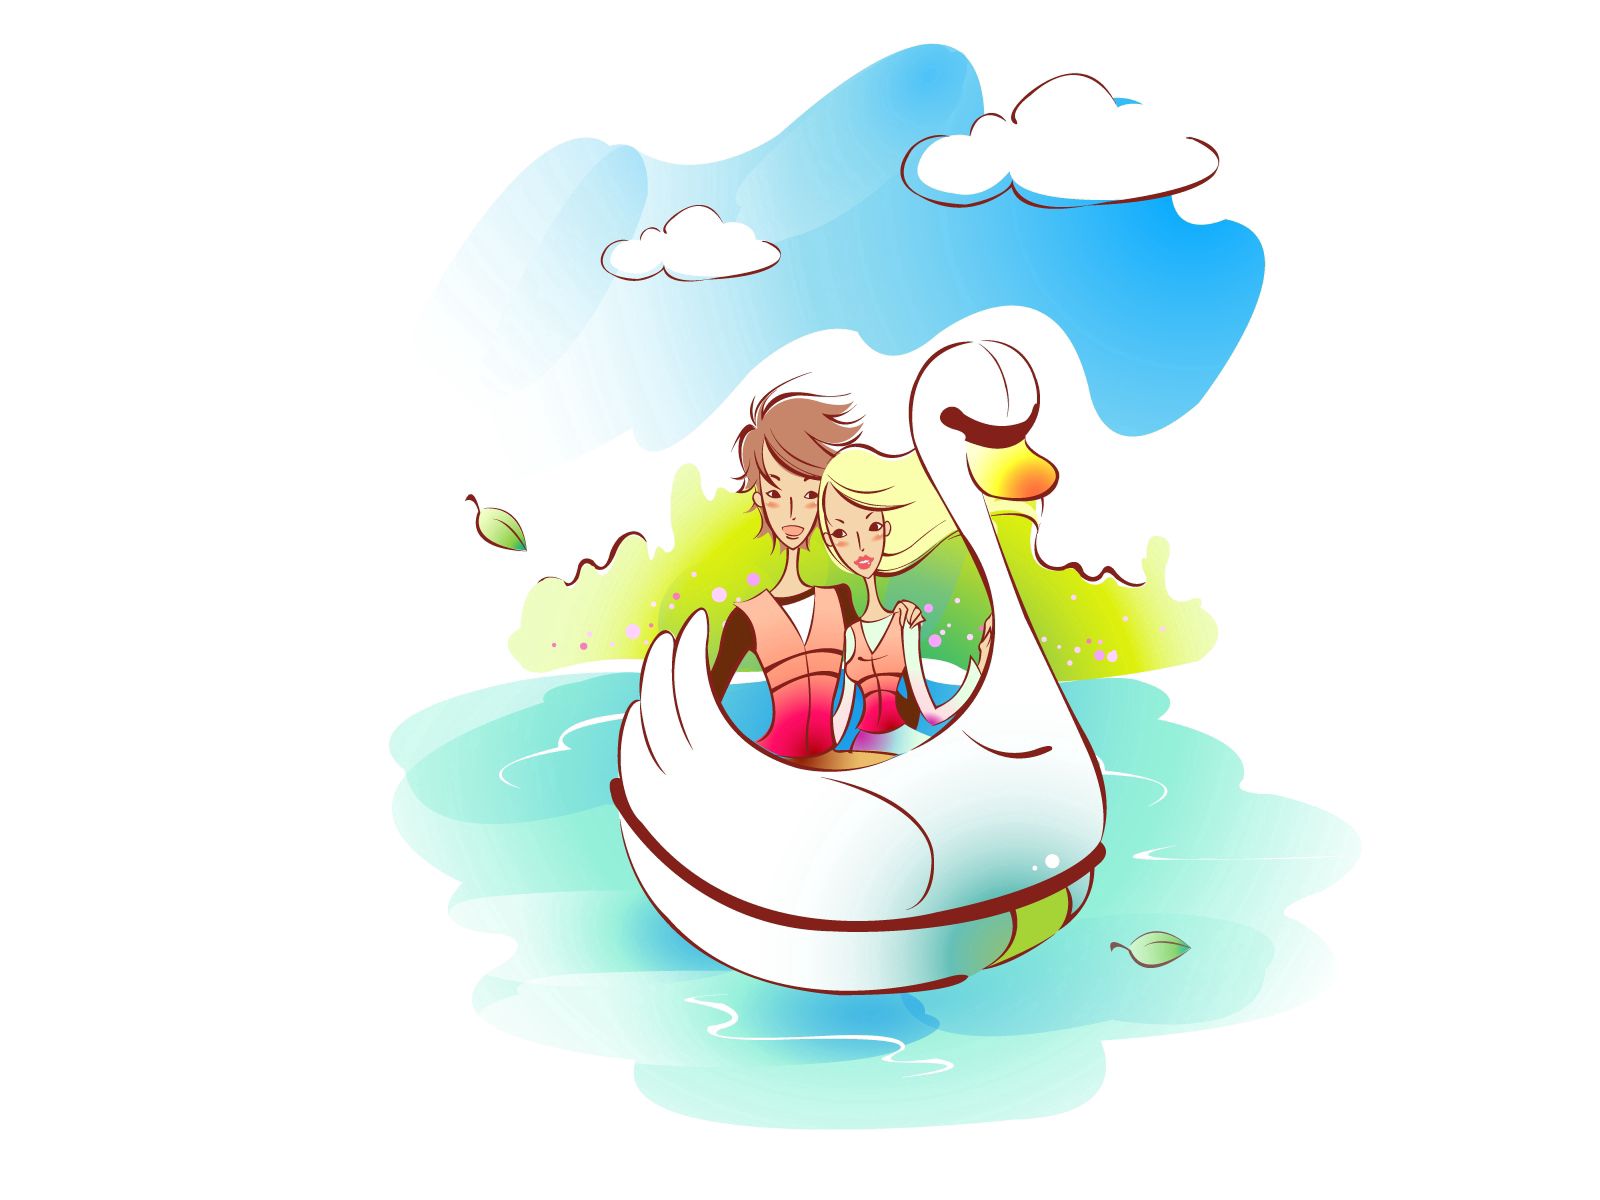 Wallpaper Full HD water, rivers, art, love, couple, pair, picture, drawing, boat